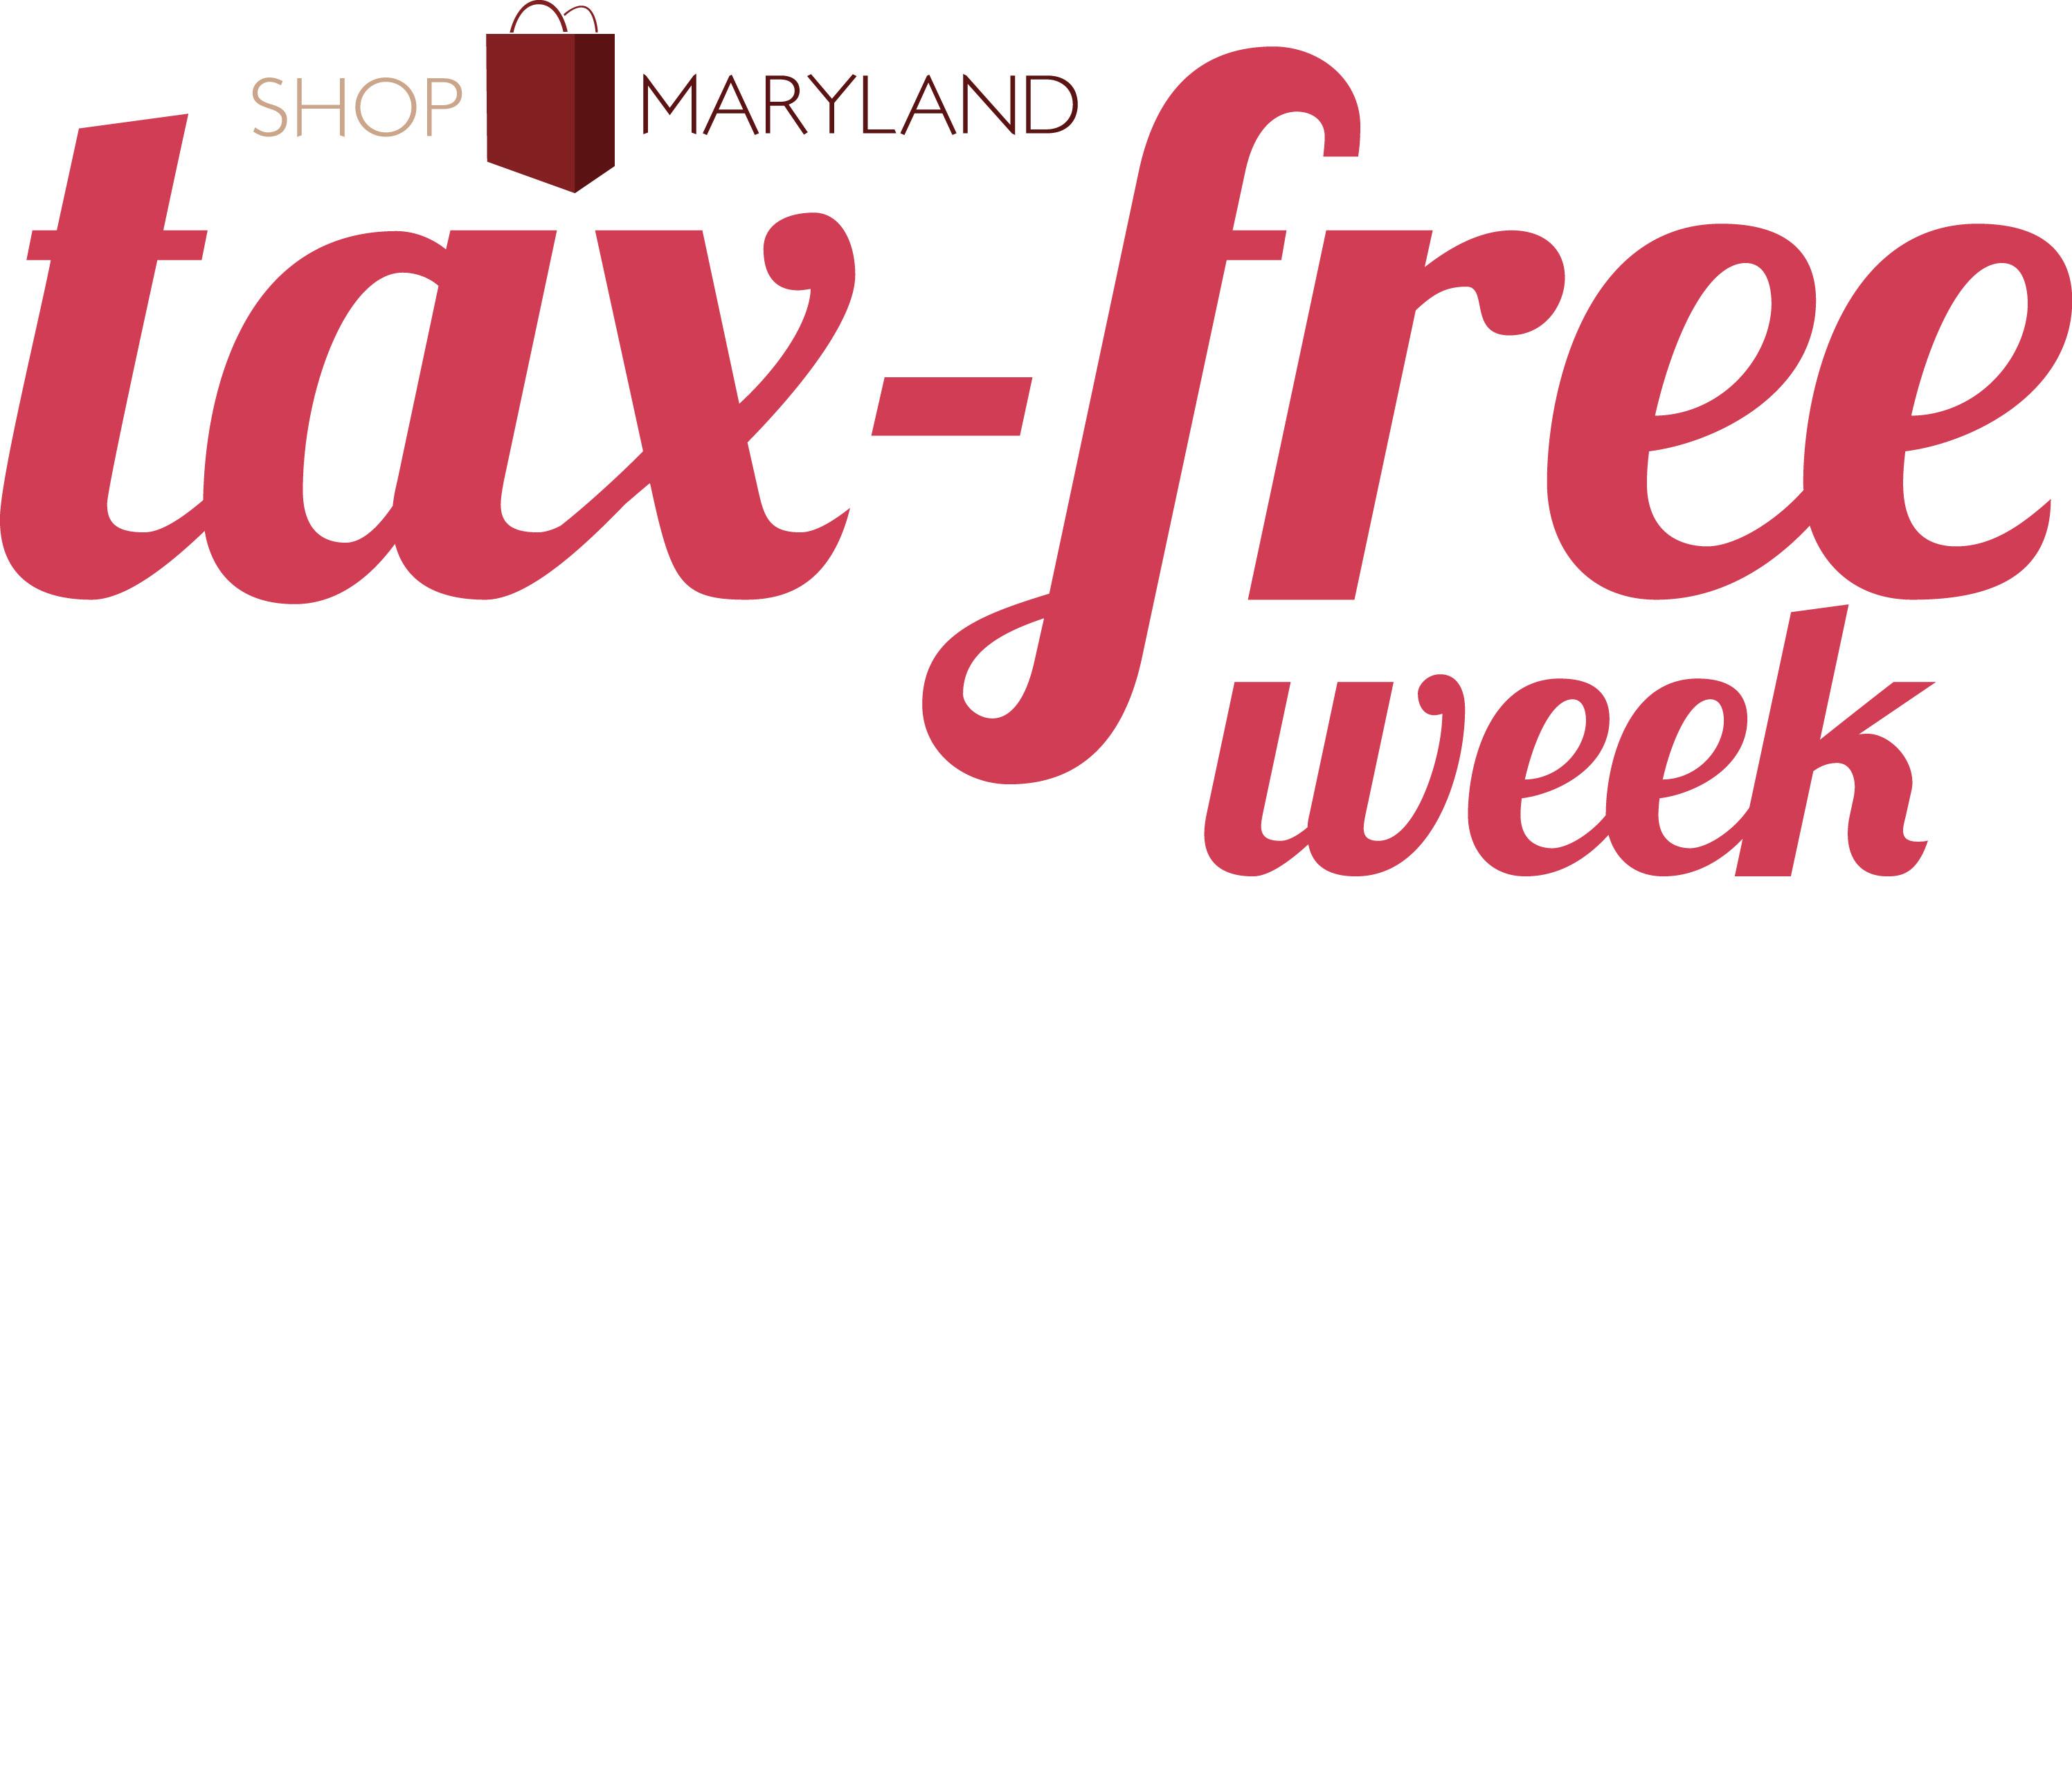 Shop Maryland TaxFree Week August 1016 SHIP SAVES